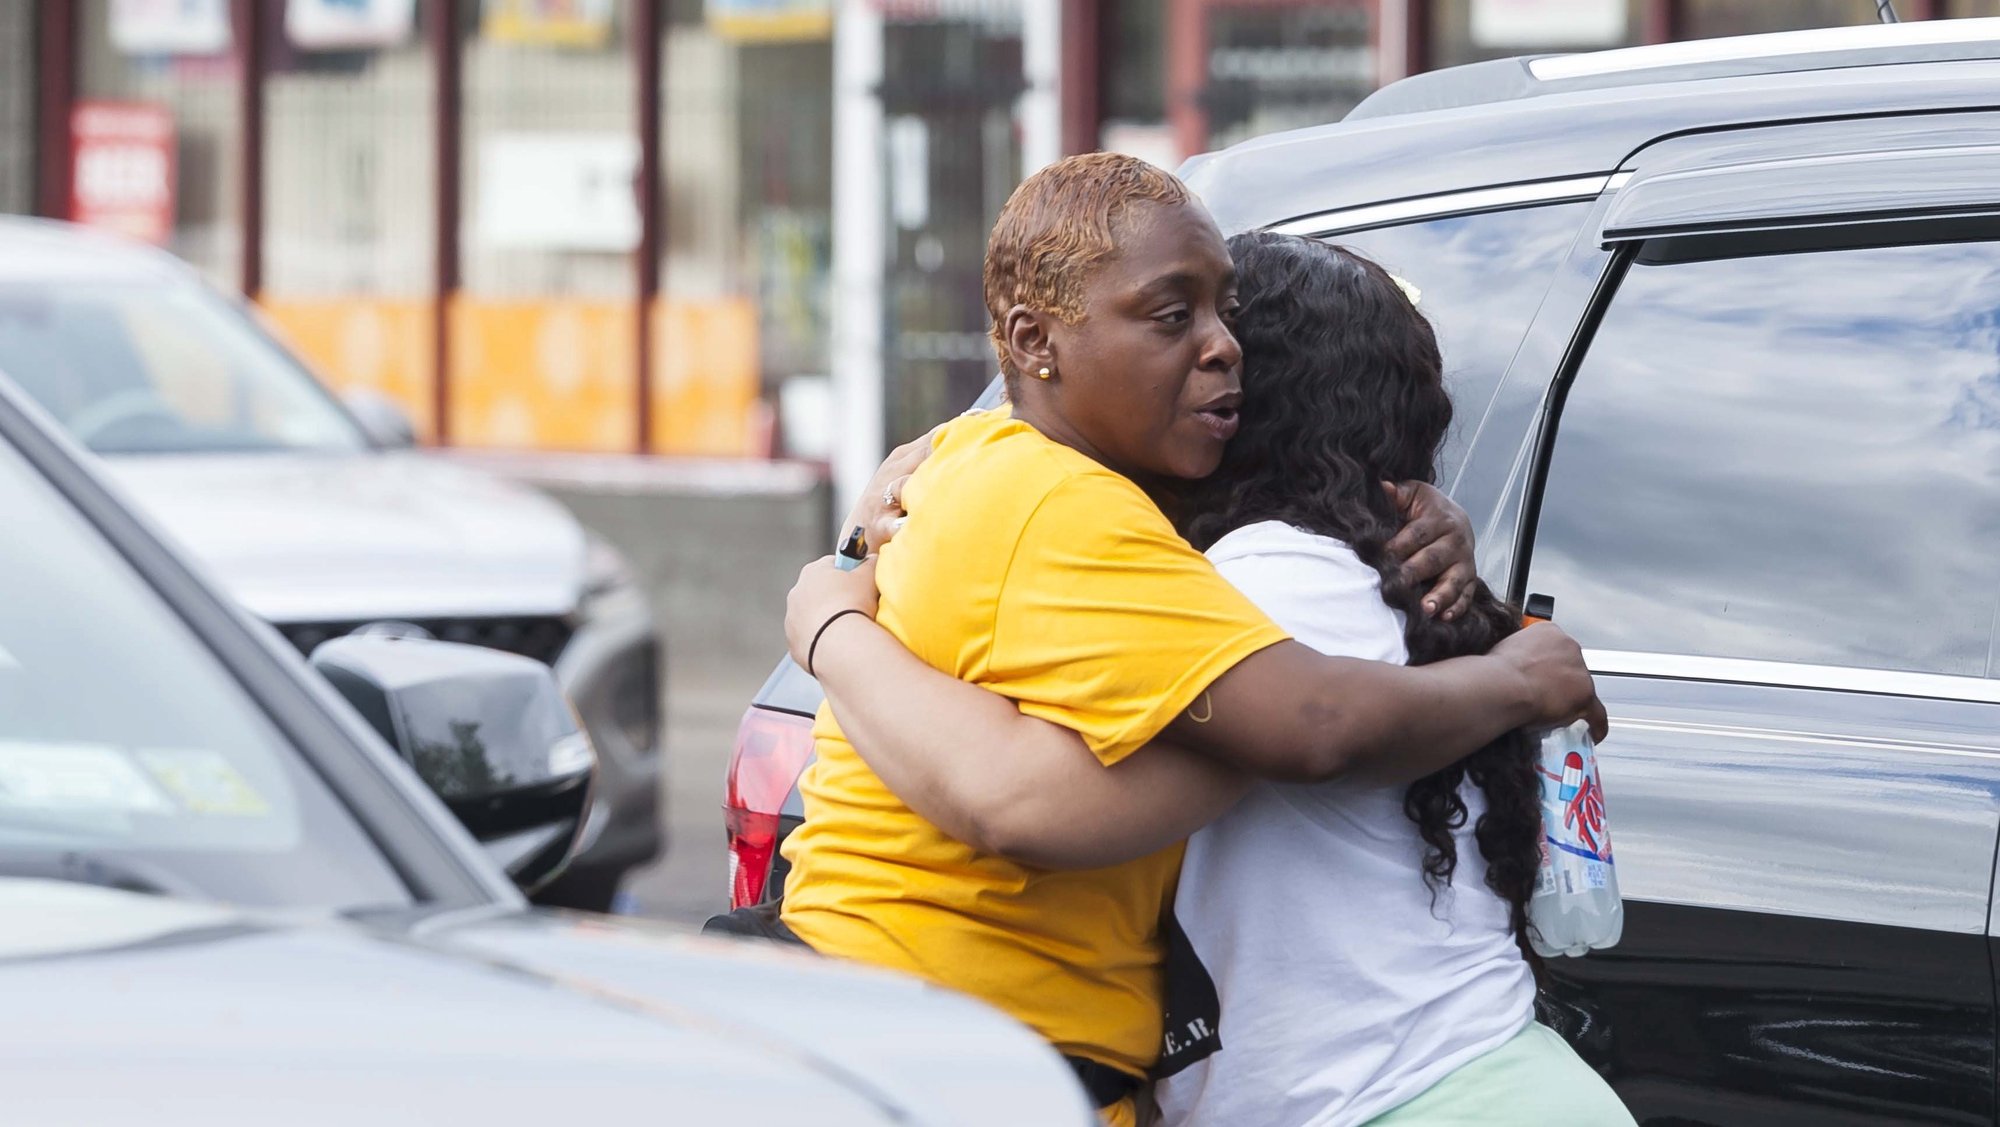 epa09947829 Two people hug near the scene of a mass shooting at the Tops Friendly Market grocery store in Buffalo, New York, USA, 14 May 2022. A gunman, who has been taken into custody by police, reportedly opened fire at the market killing as many as 10 people.  EPA/BRANDON WATSON